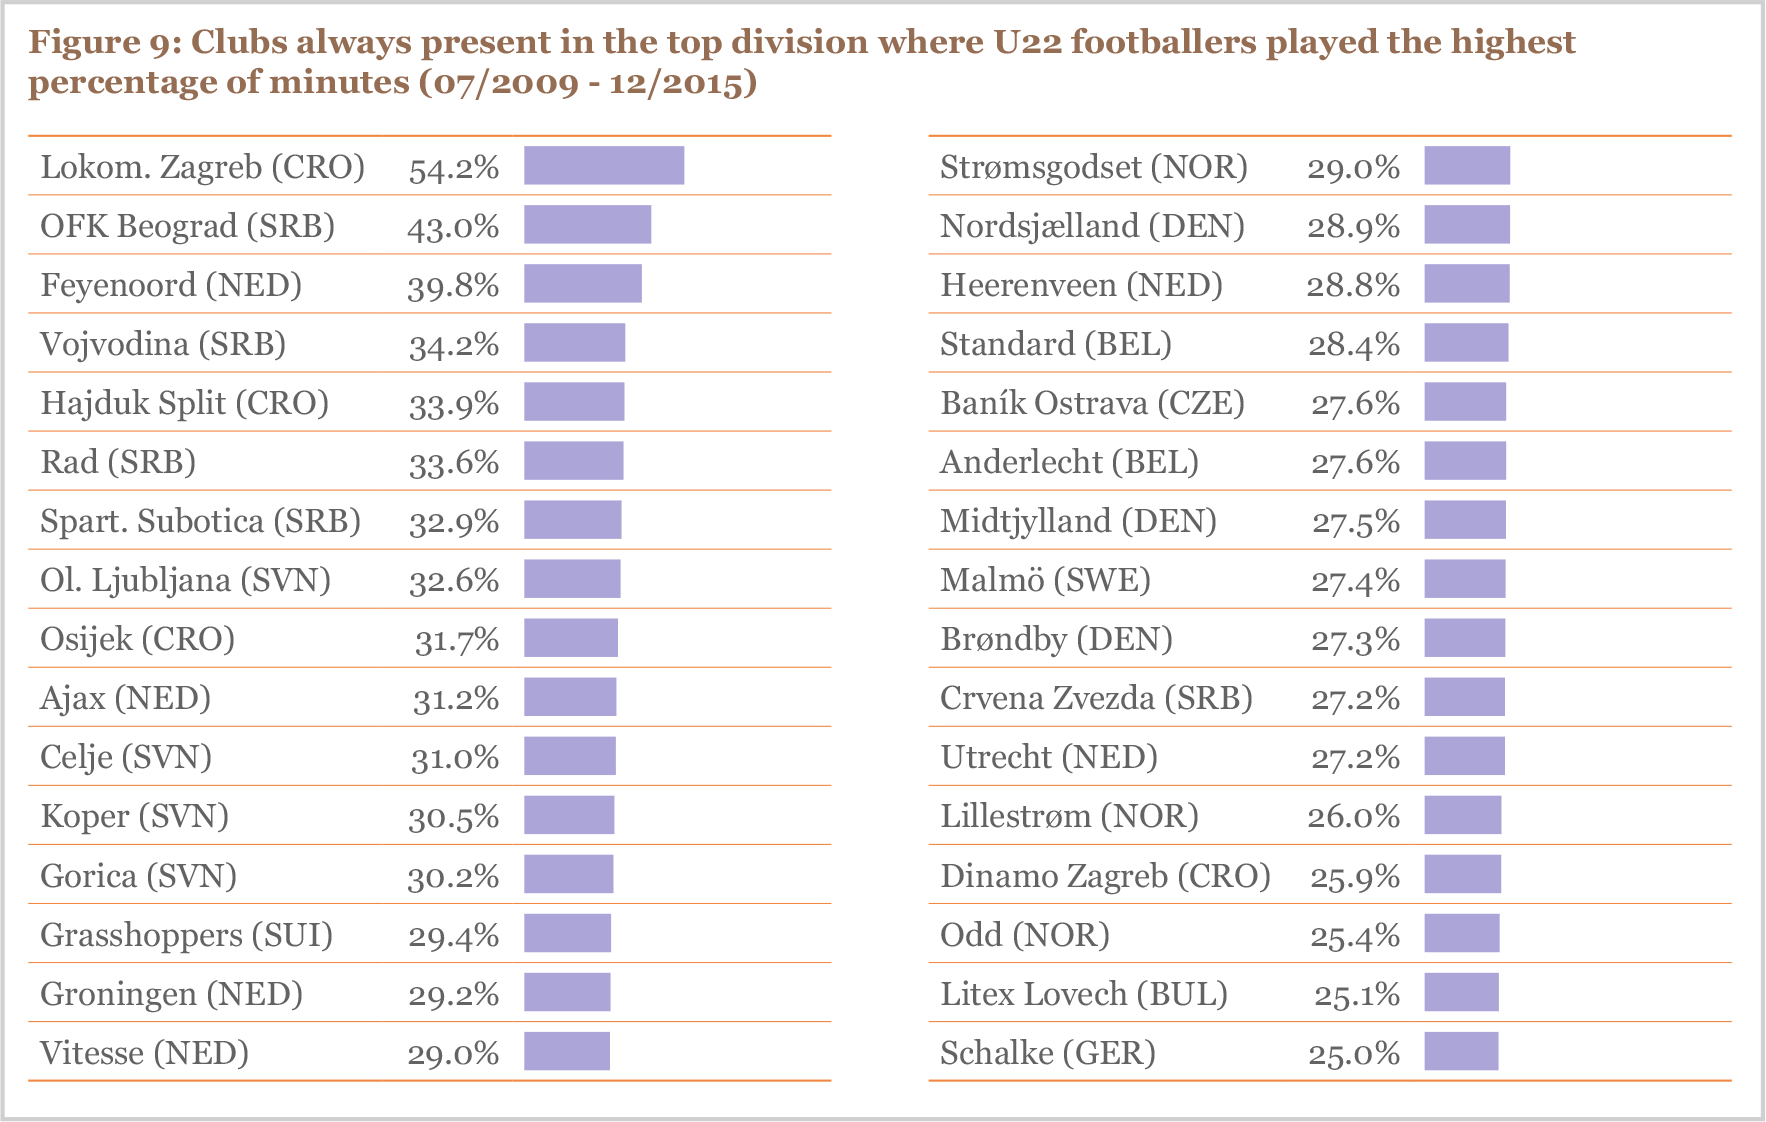 Clubs always present in the top division where U22 footballers played the highest percentage of minutes (07/2009 - 12/2015)